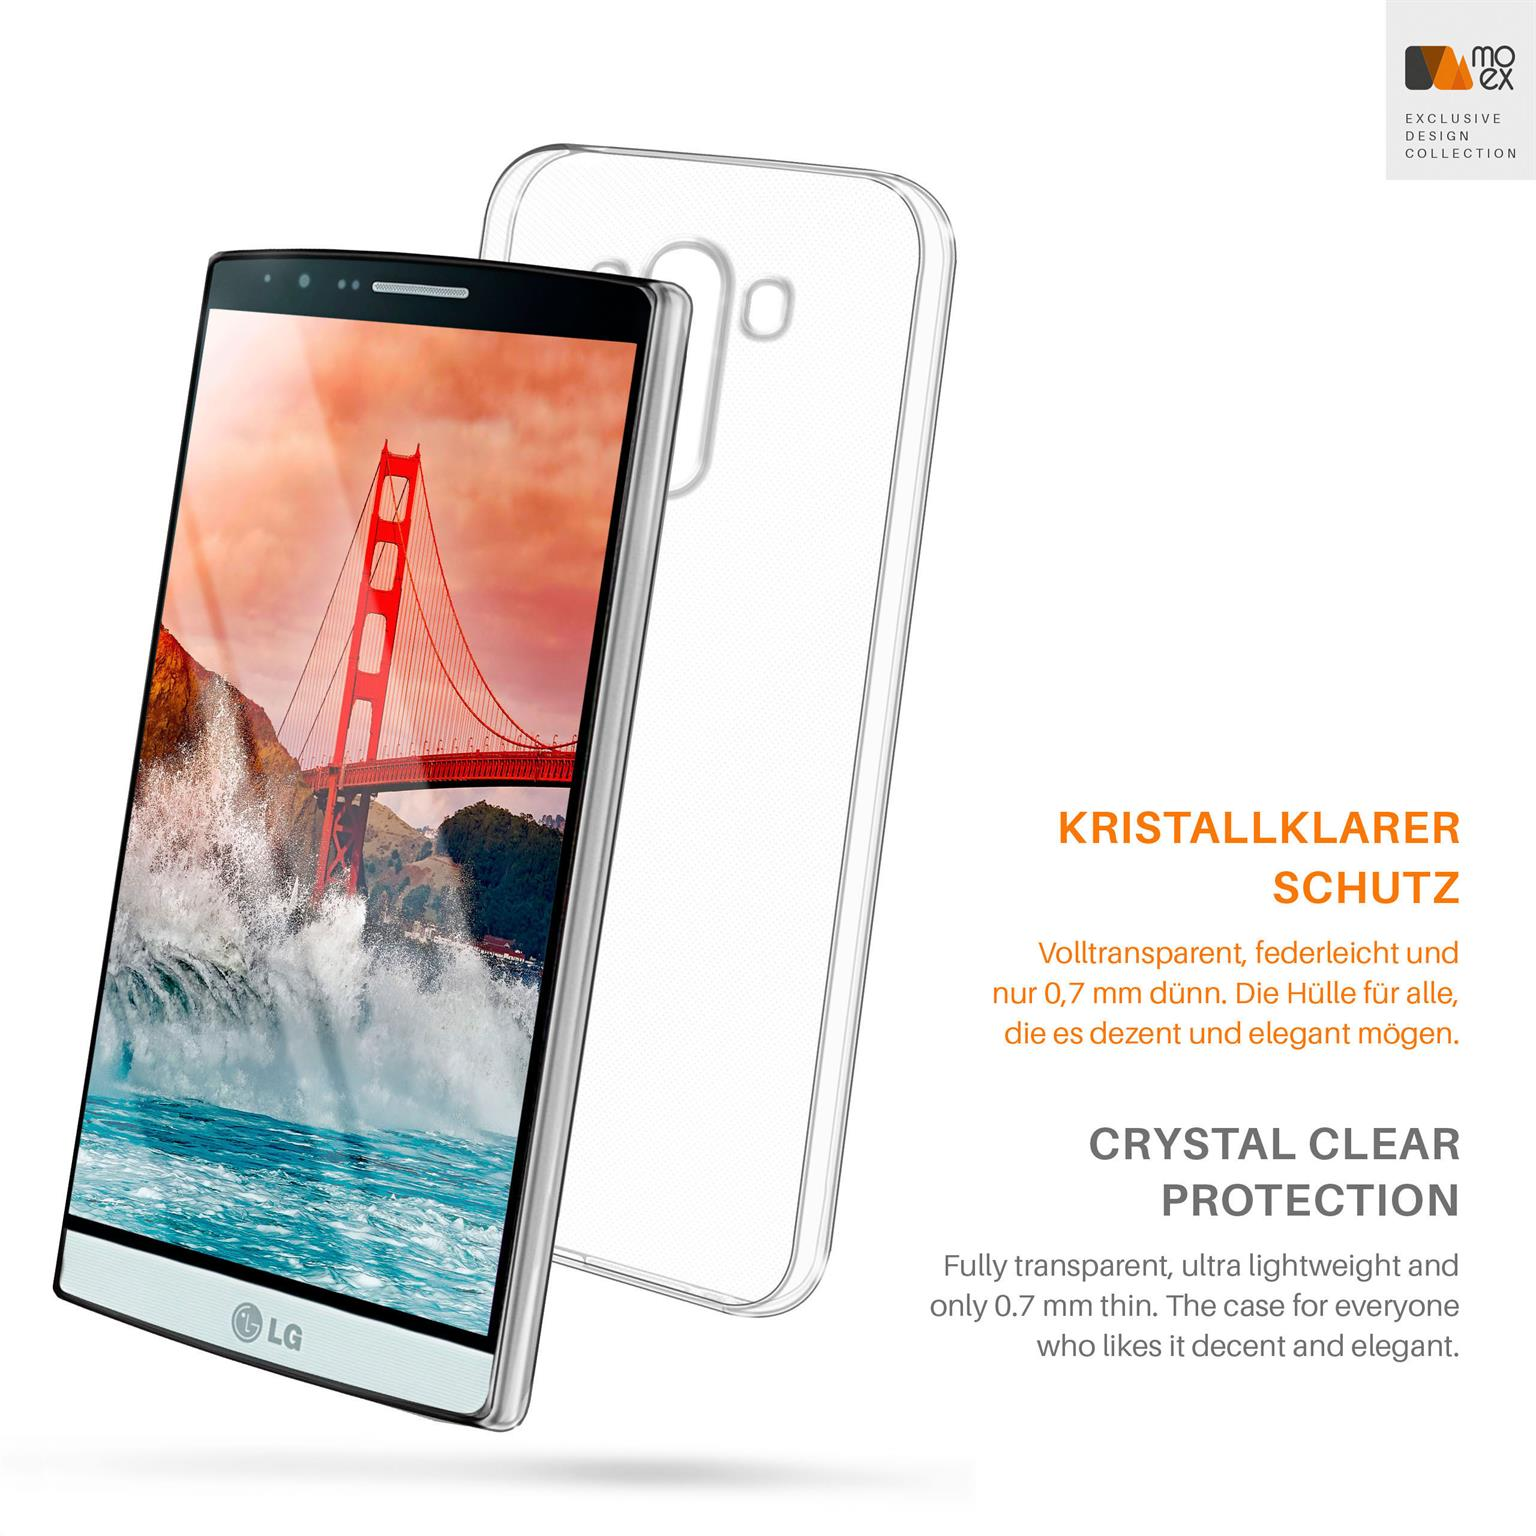 MOEX Aero Case, Crystal-Clear LG, G3, Backcover